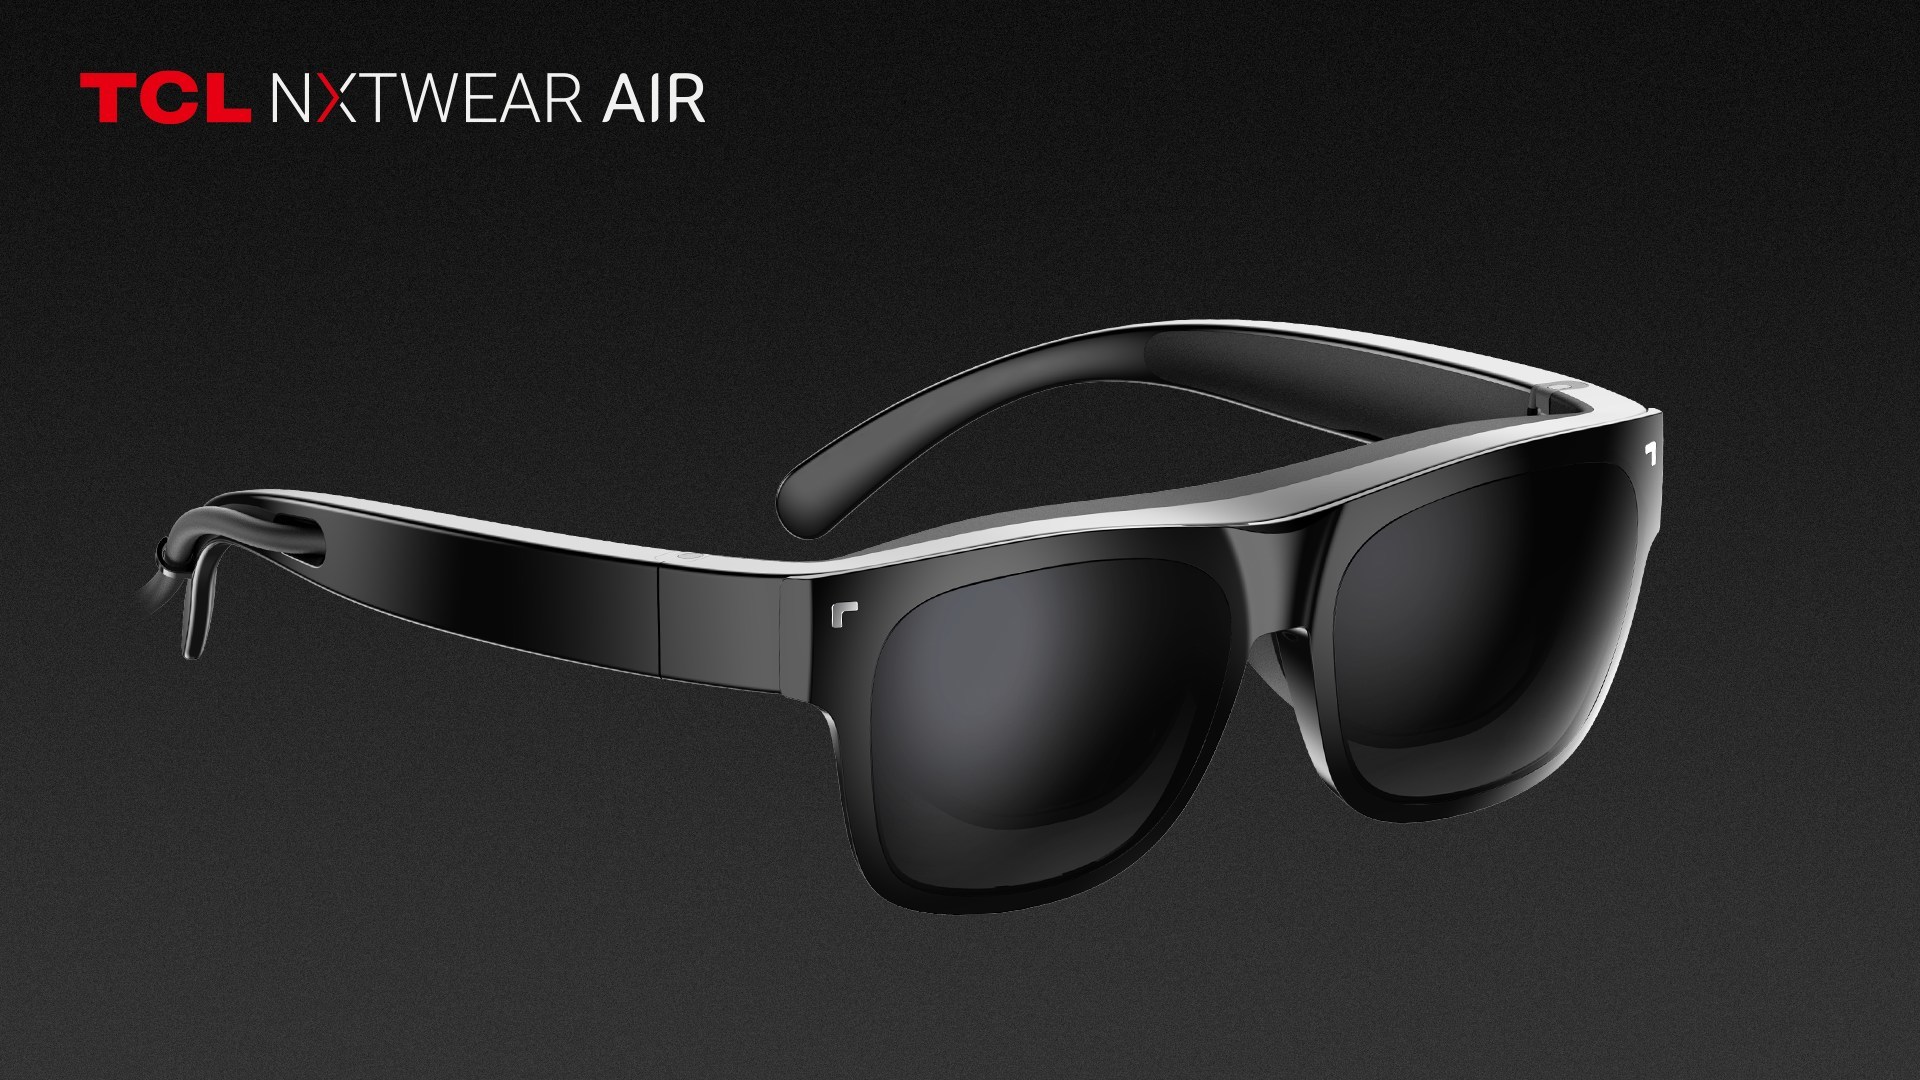 TCL unveils new wearable display smart glasses - 9to5Toys